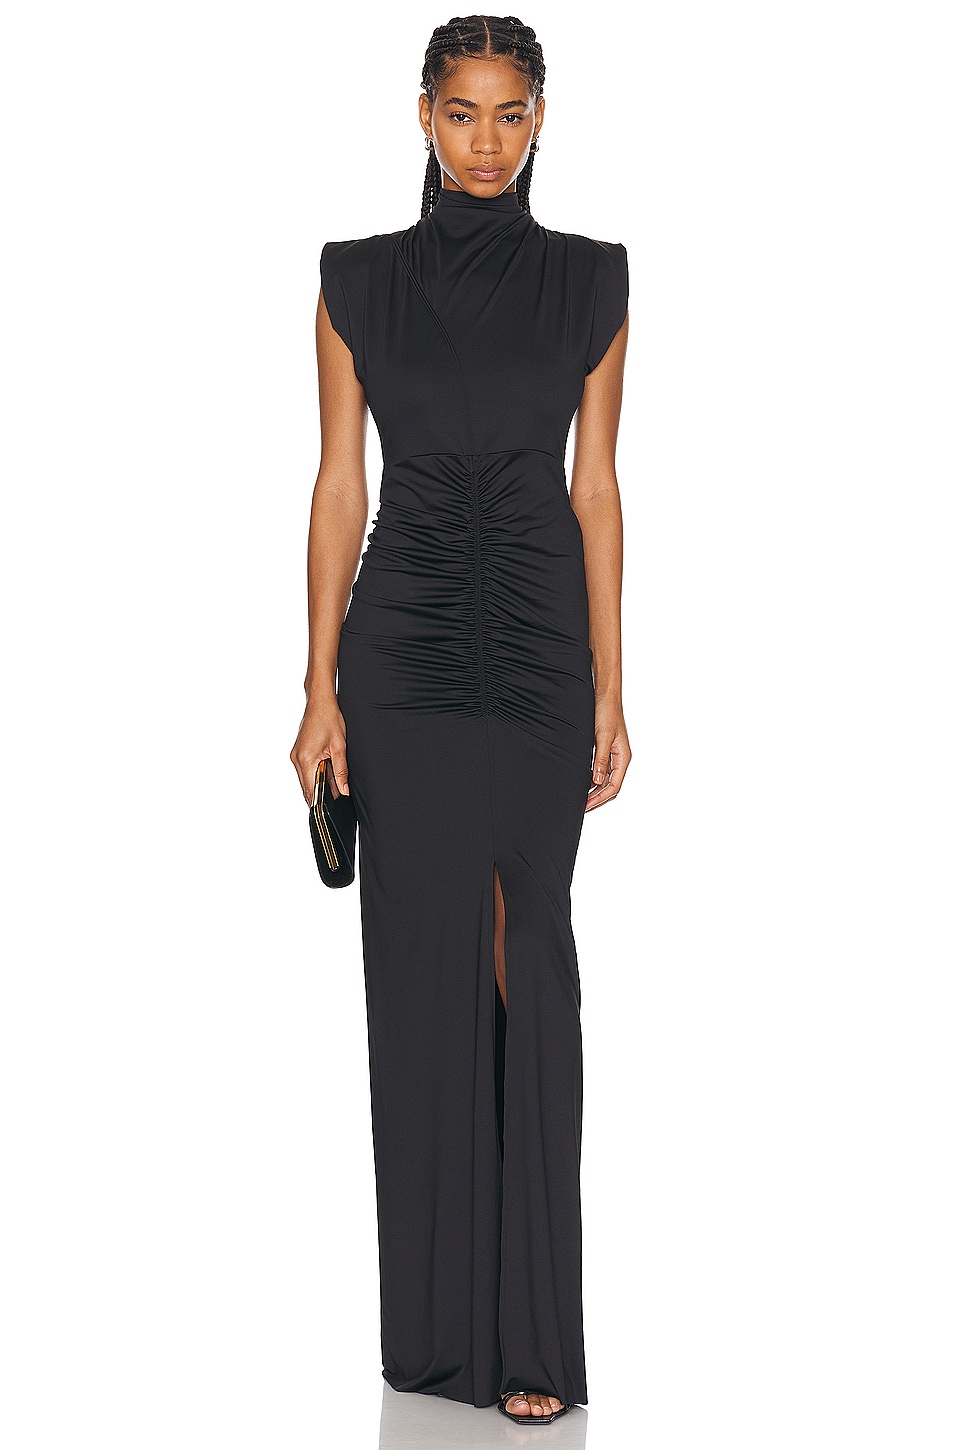 Image 1 of Victoria Beckham Ruched Gown in Black